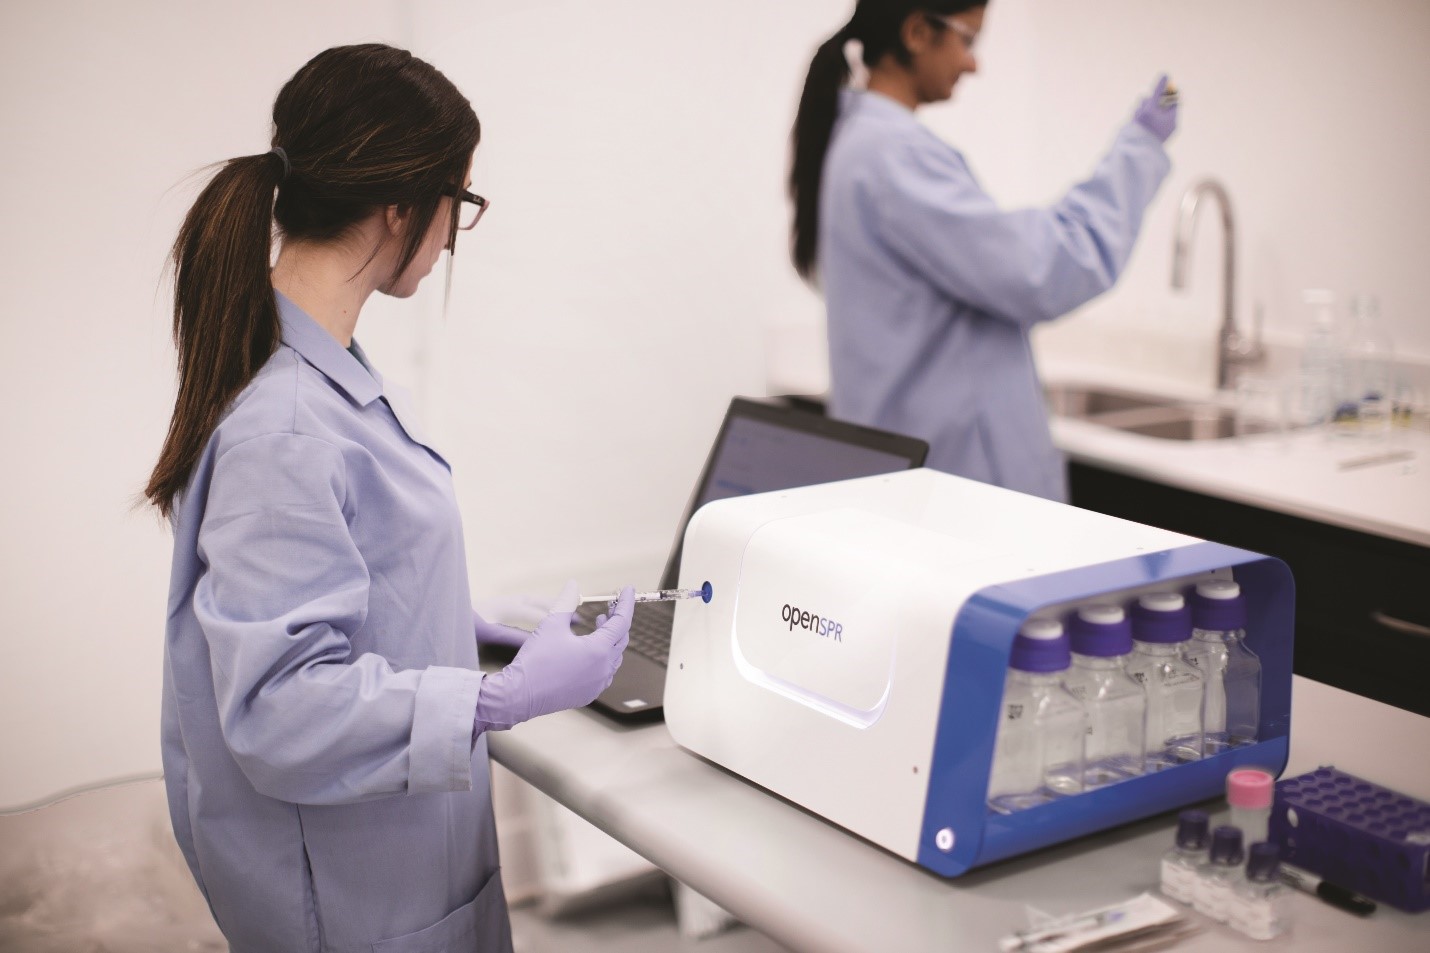 Scientist uses the Nicoya OpenSPR-2 instrument to analyze protein interactions